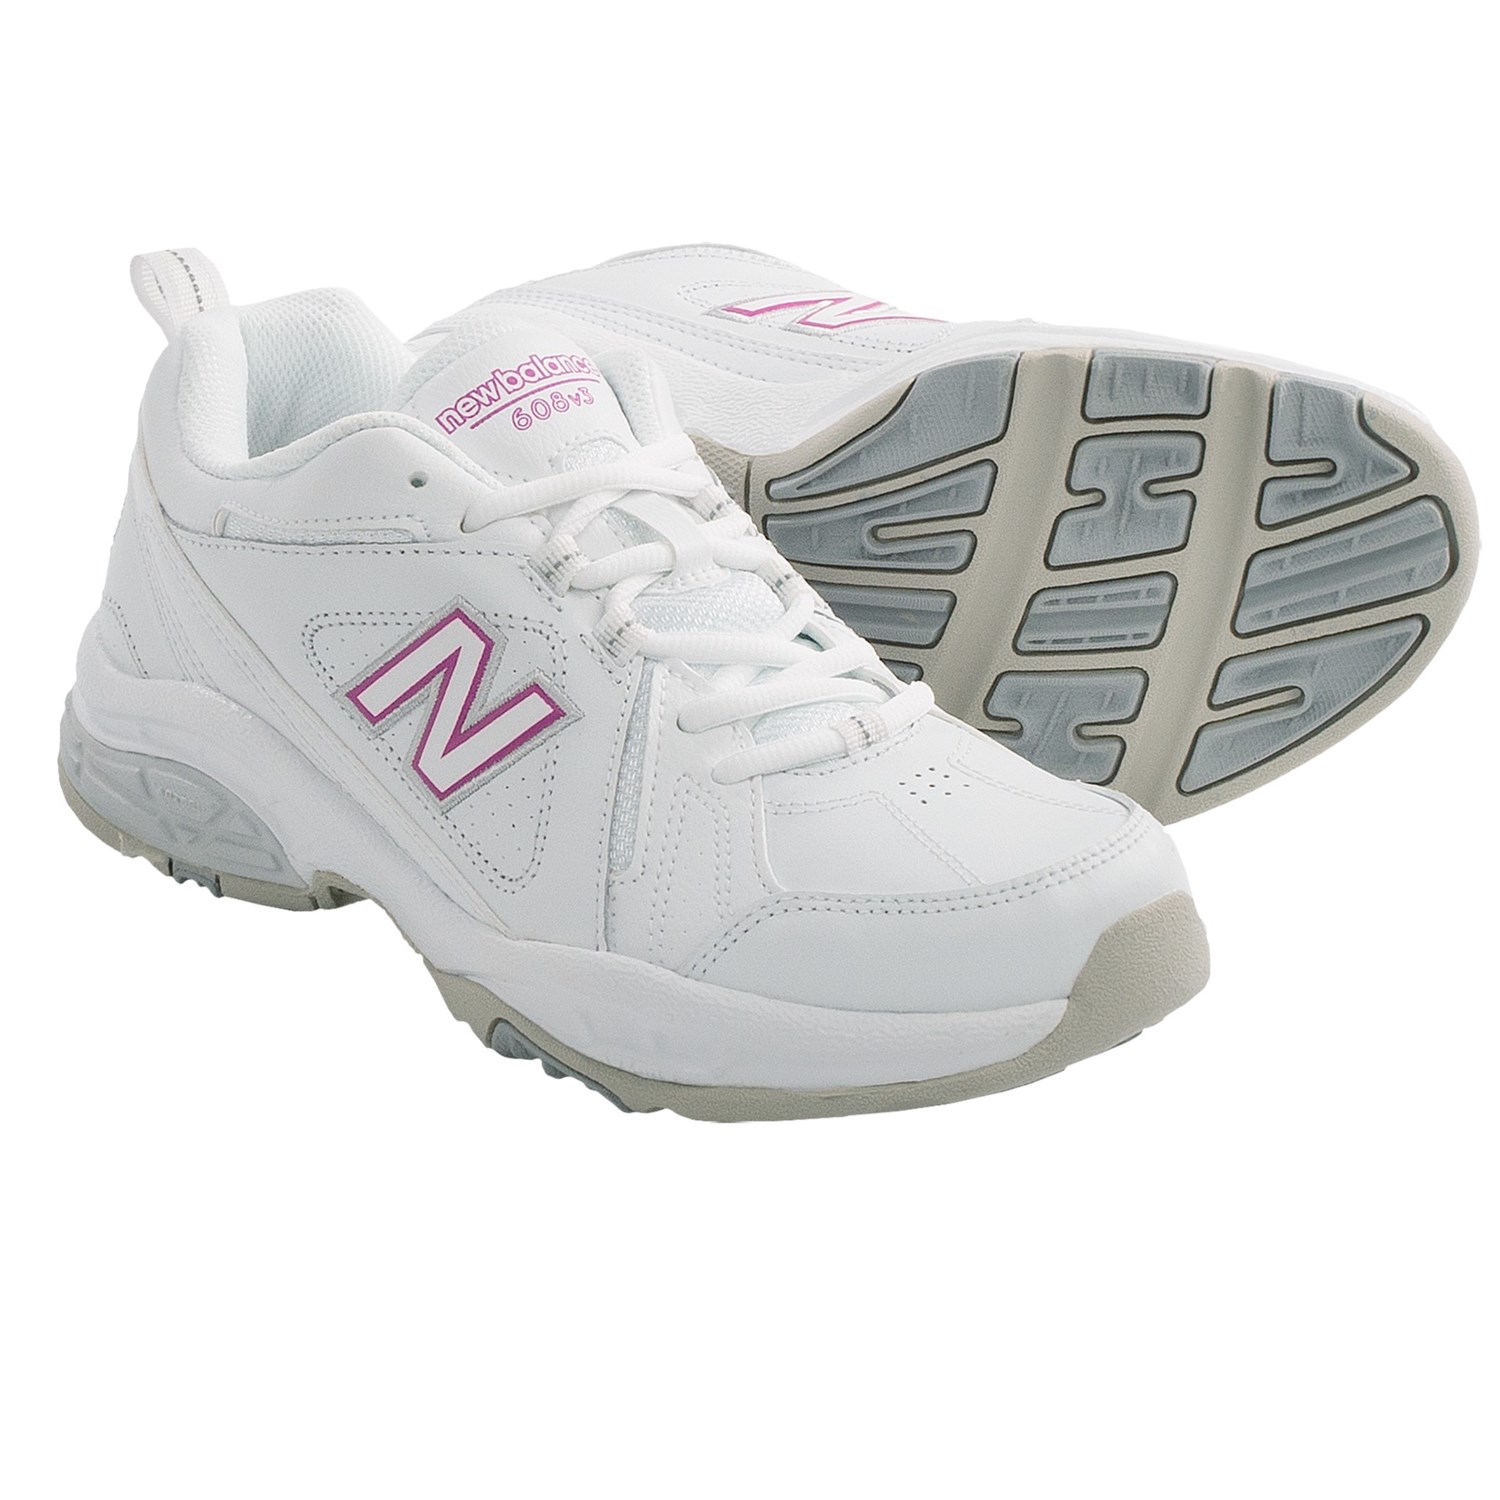 New Balance 608V3 Cross Training Shoes (For Women) 8282D - Save 42%